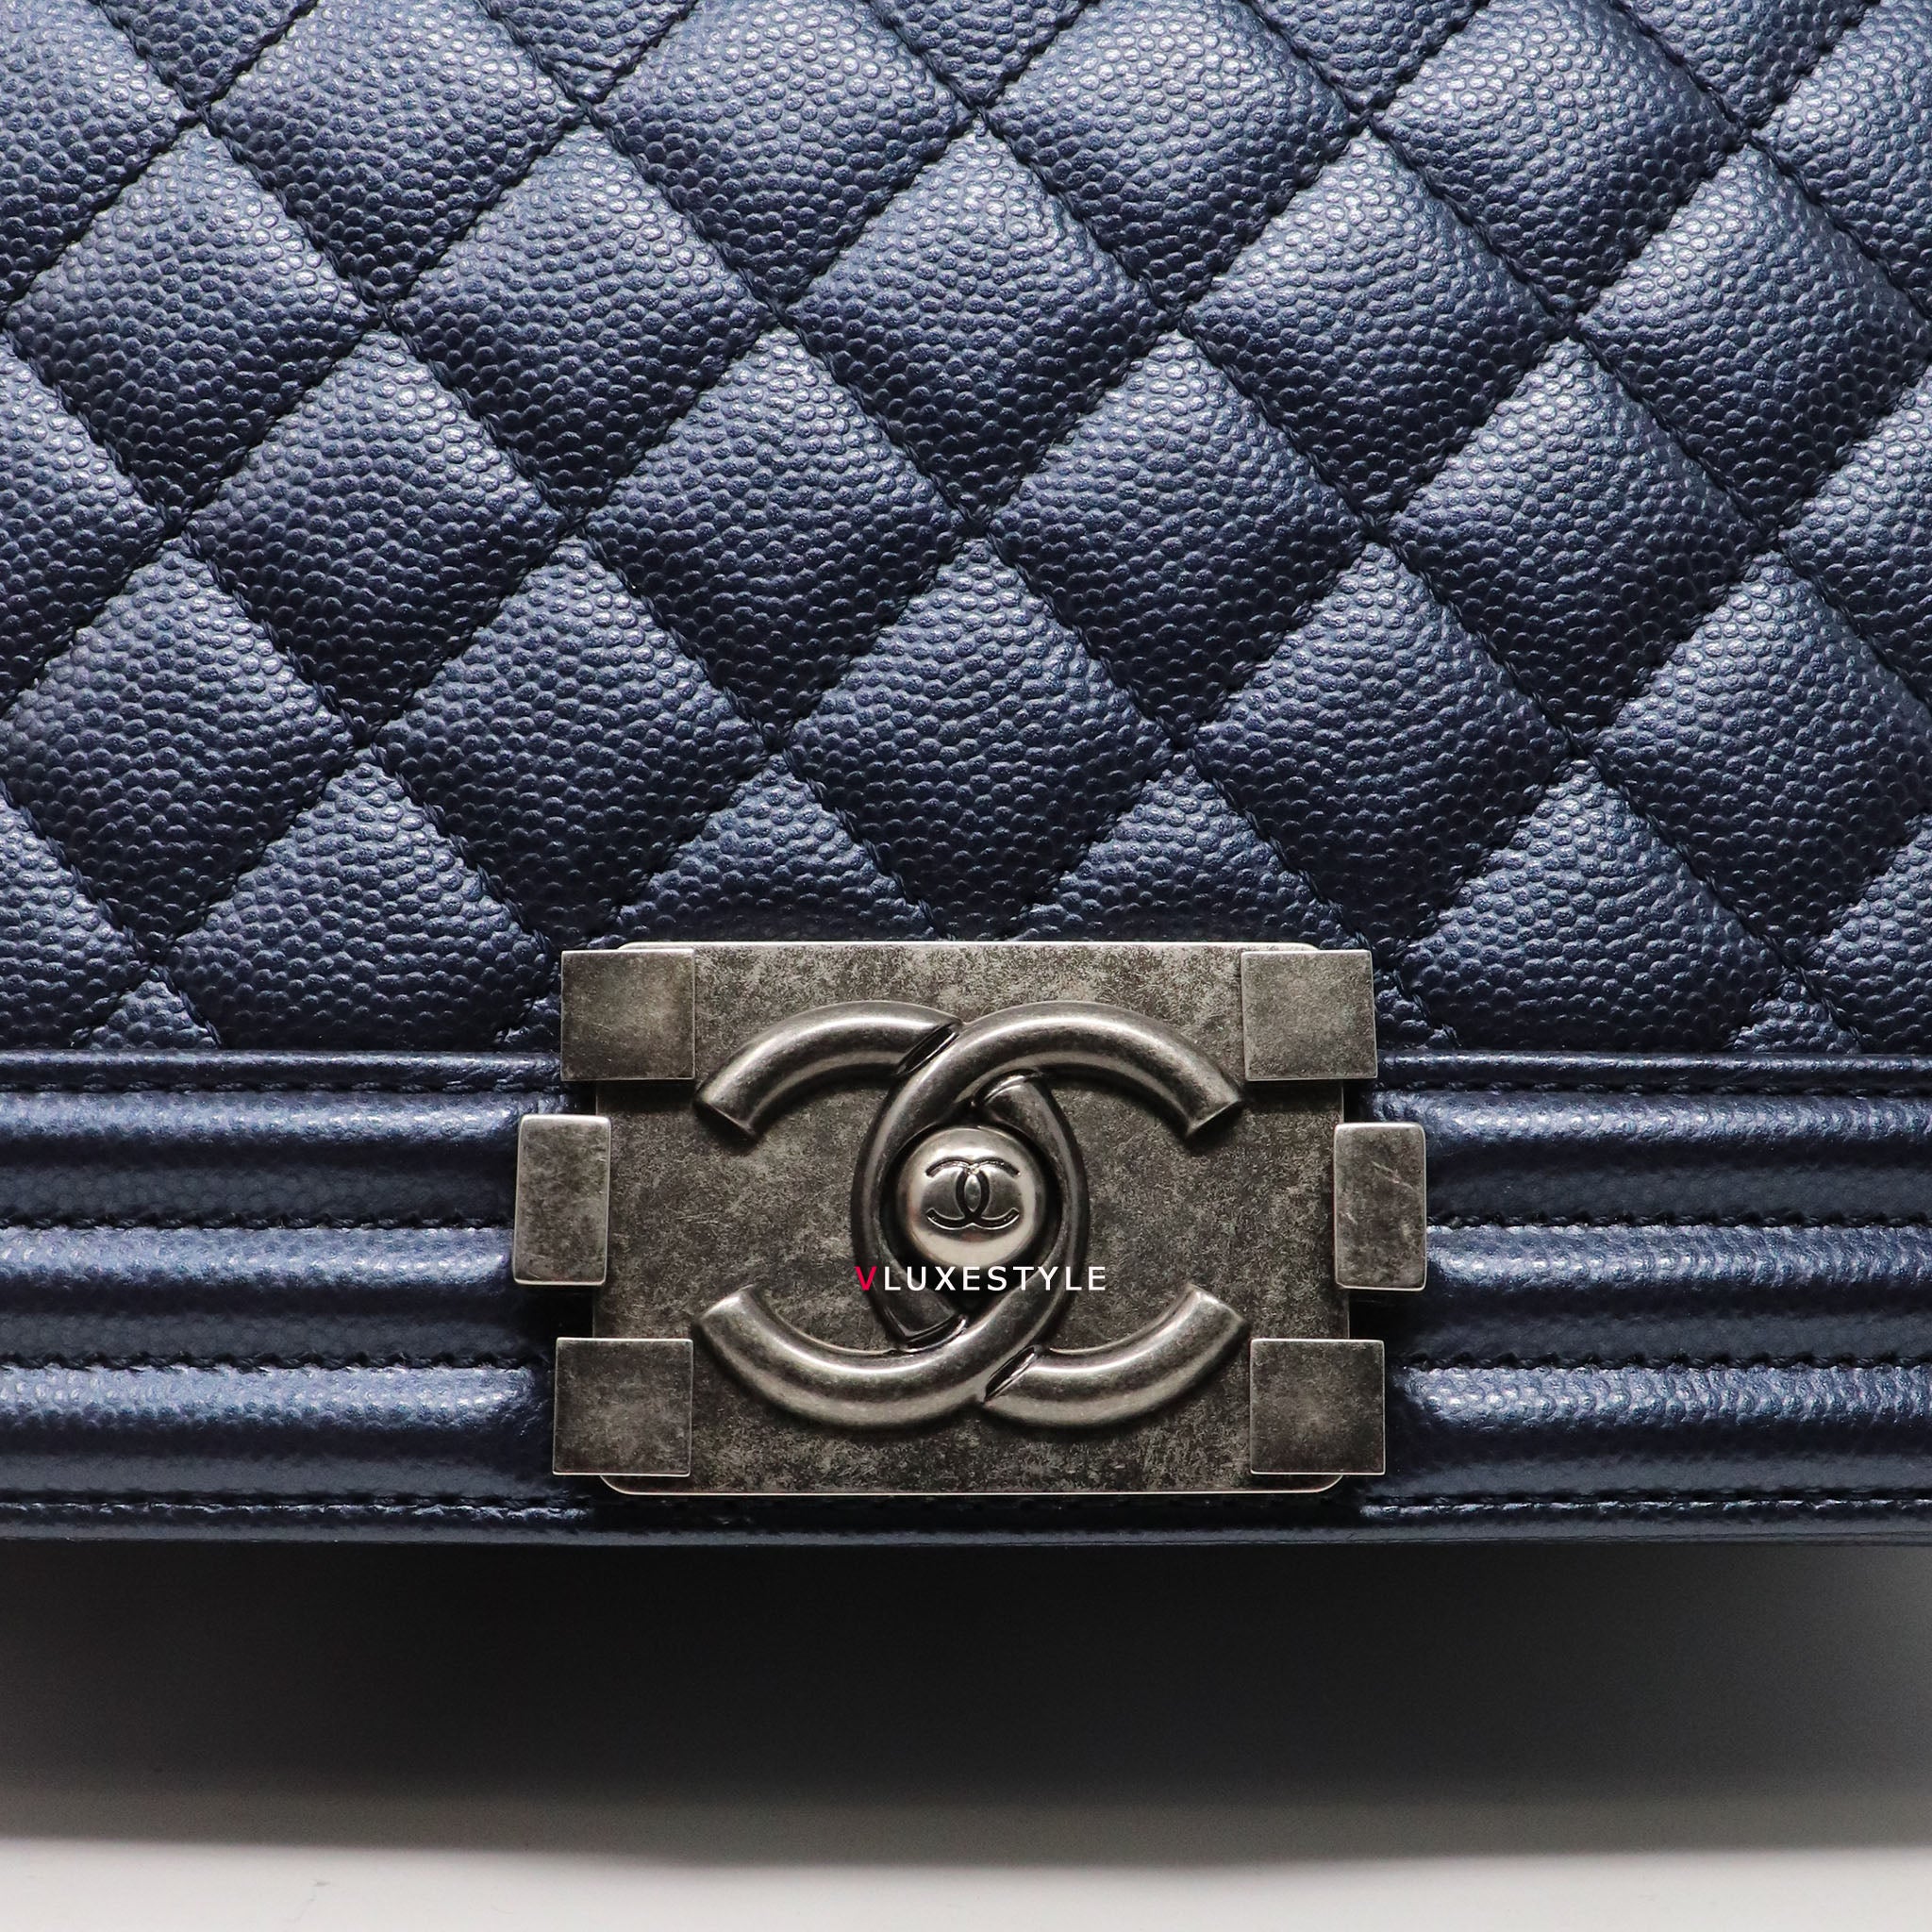 Chanel Le Boy Old Medium Metallic Navy Quilted Caviar with ruthenium  hardware